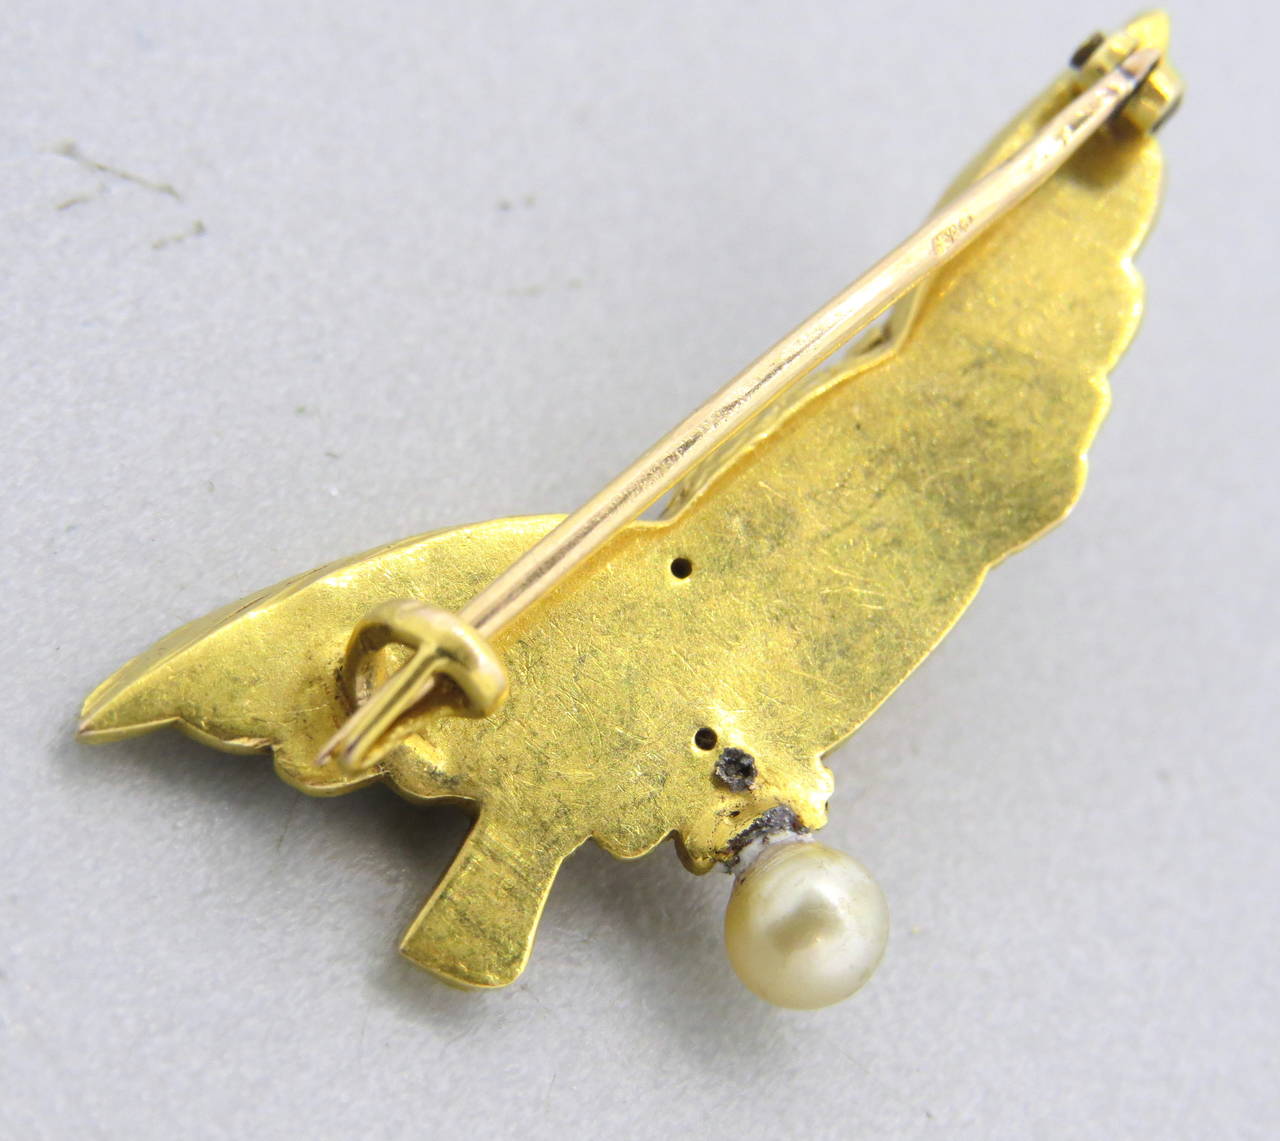 Antique 18k gold brooch, featuring an owl, decorated with one 4.5mm pearl, emeralds and diamonds. Brooch measures 40mm x 19m. Weight of the piece - 8.6 grams